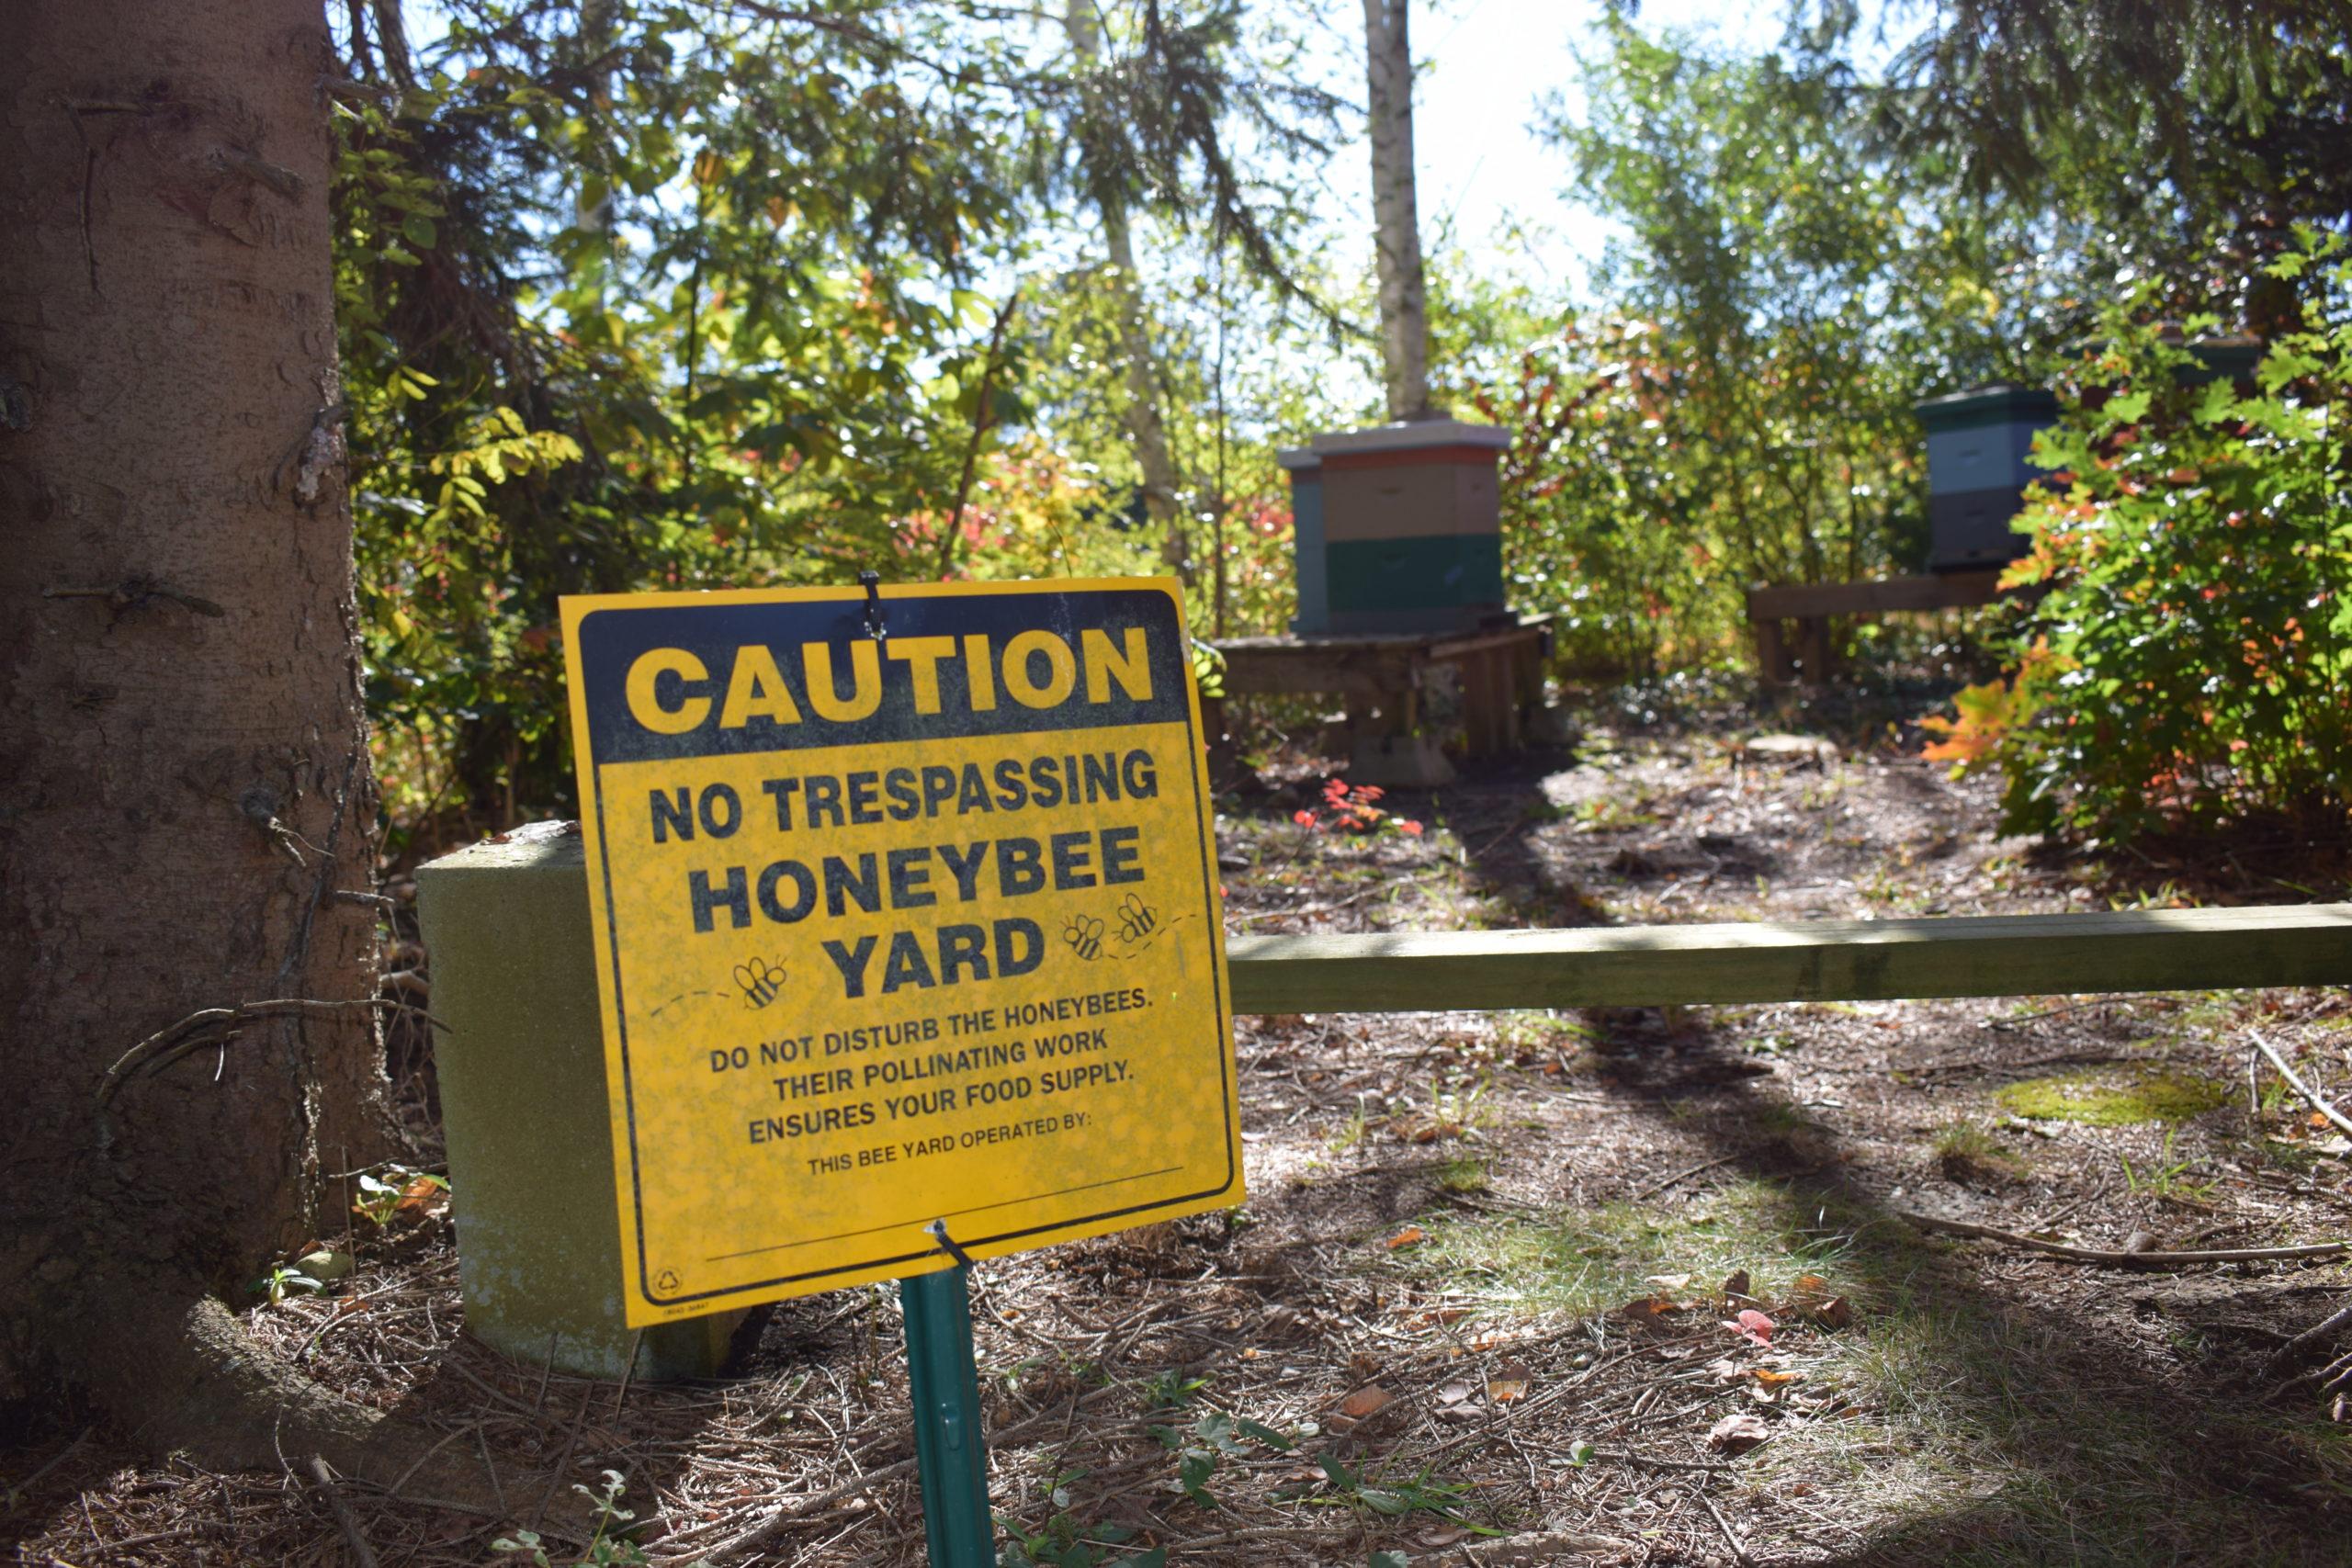 A close-up of the sign outside the beehives.  It reads:  "CAUTION.  No Trespassing.  Honeybee Yard.  Do not disturb the honeybees.  Their pollinating work ensures your food supply. "